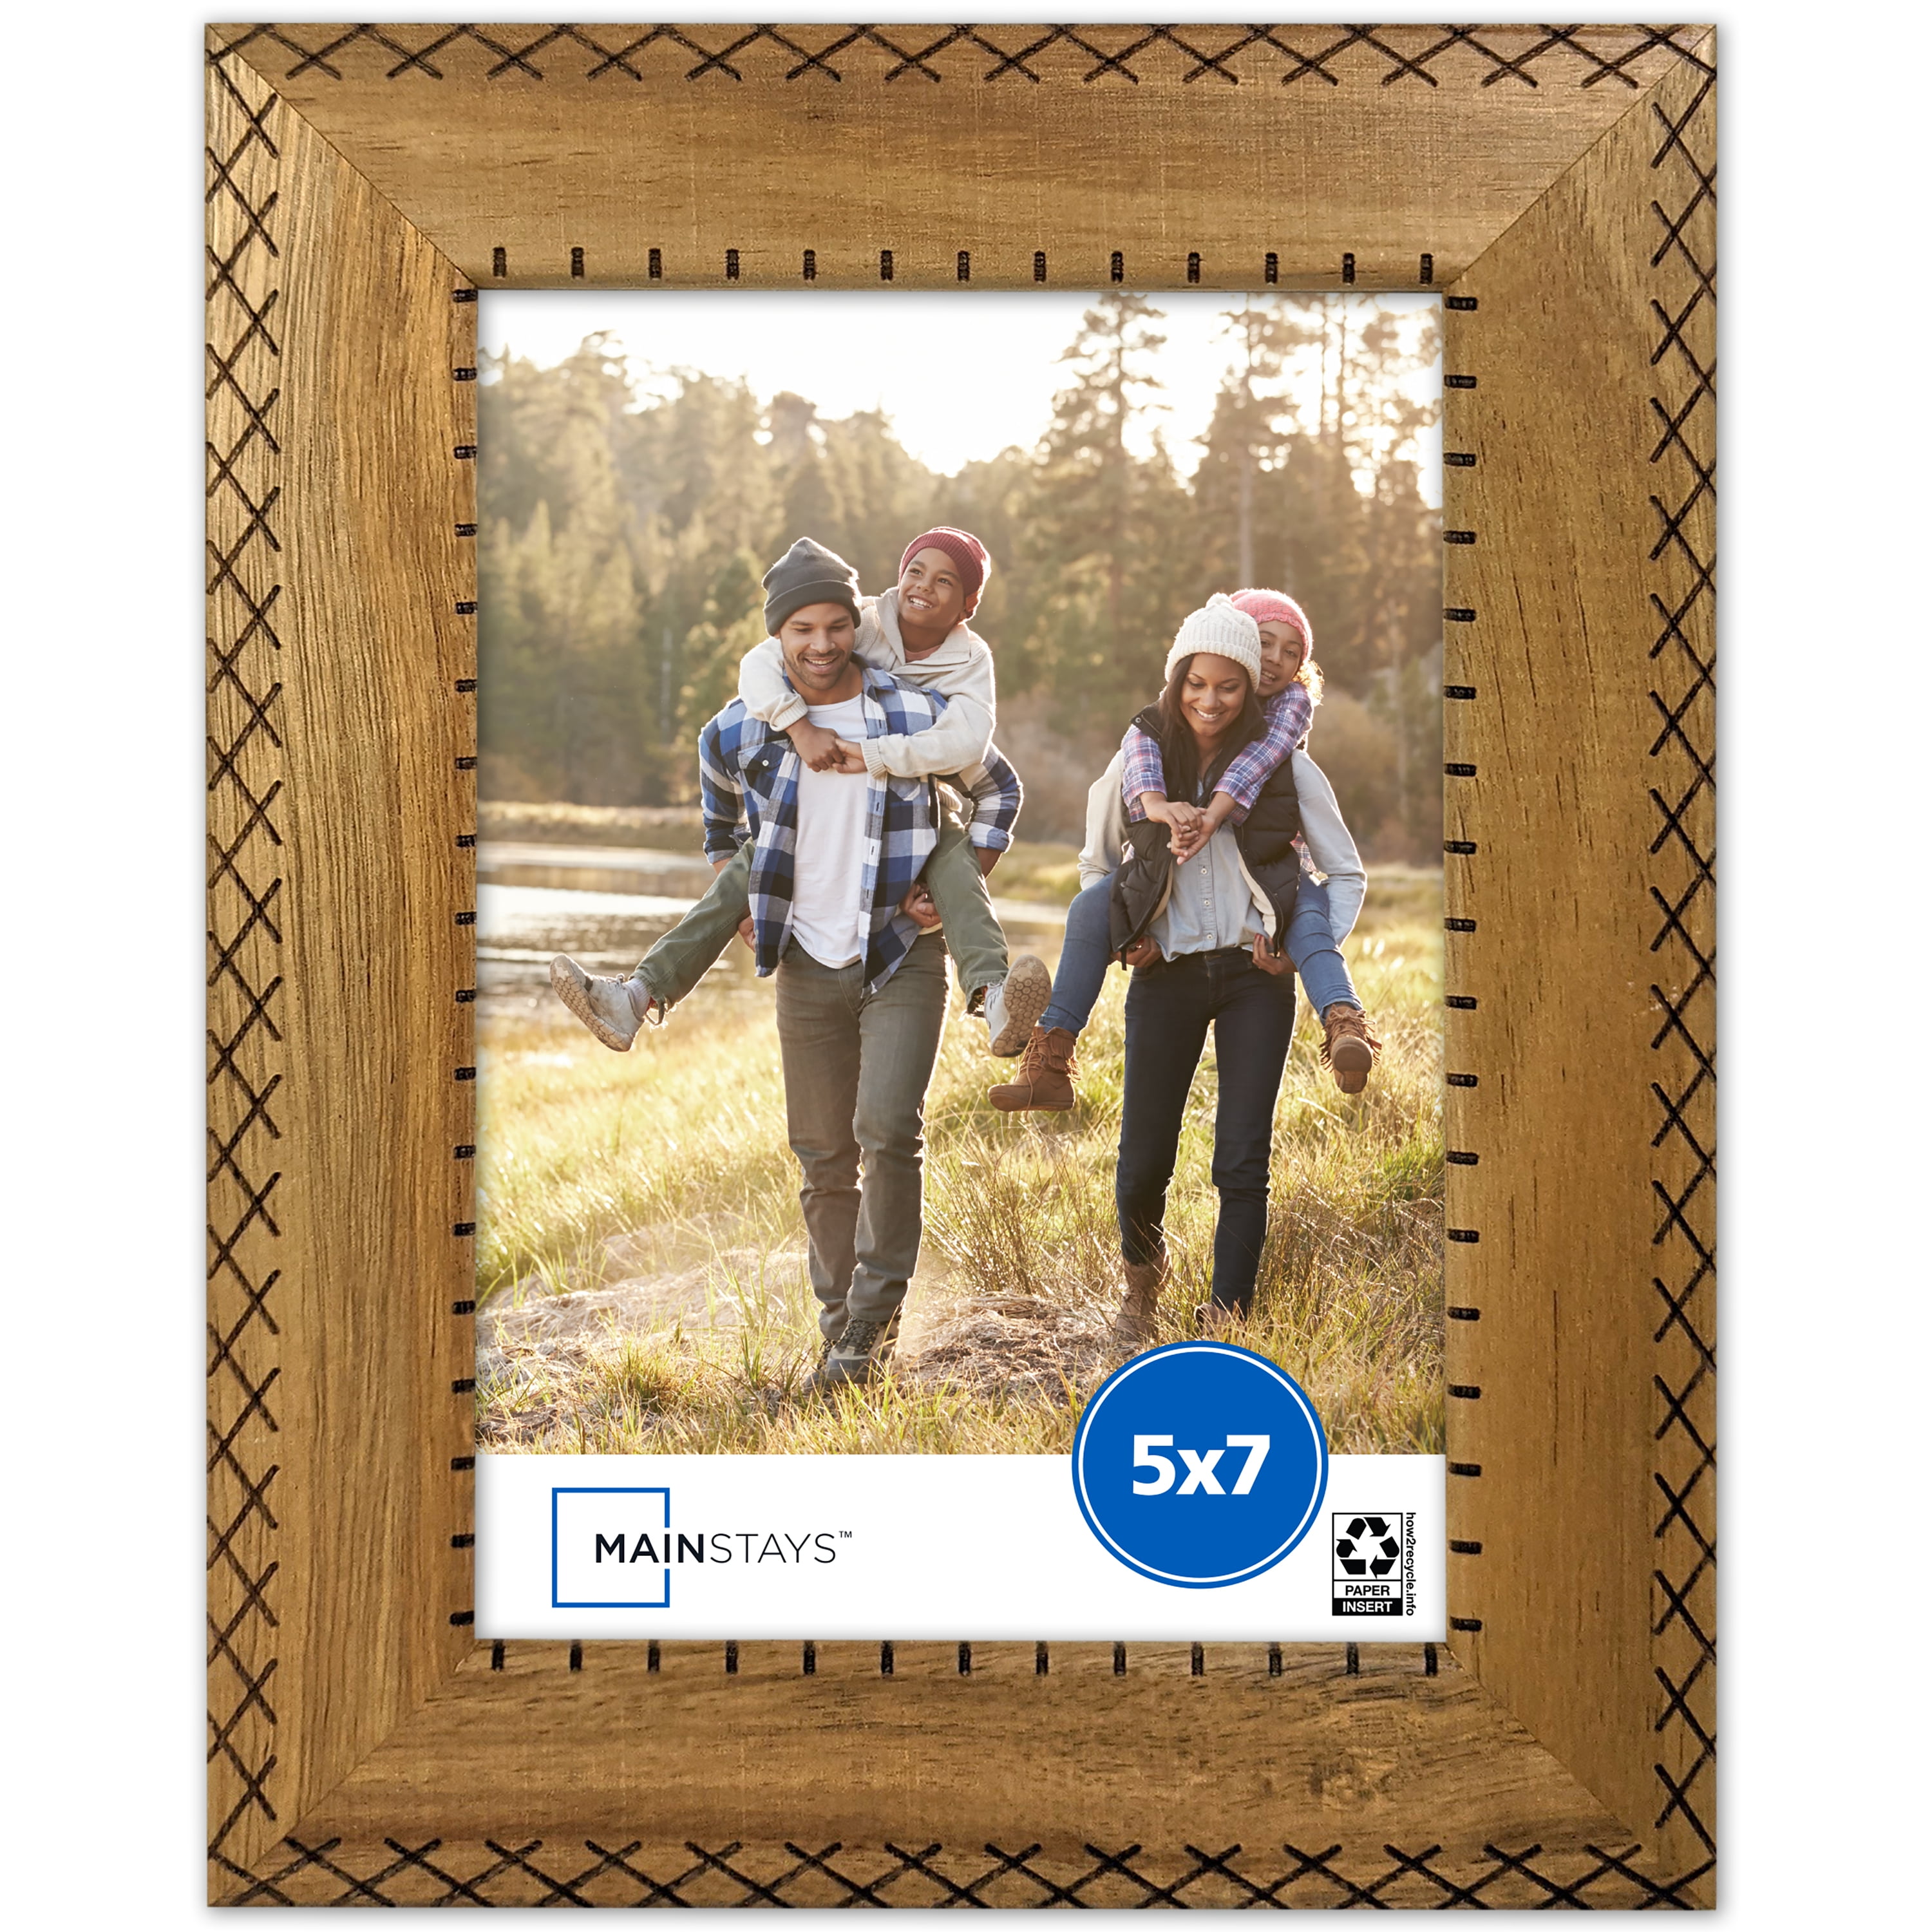 Mainstays 4x6 Linear Gallery Wall Picture Frame, Brown 